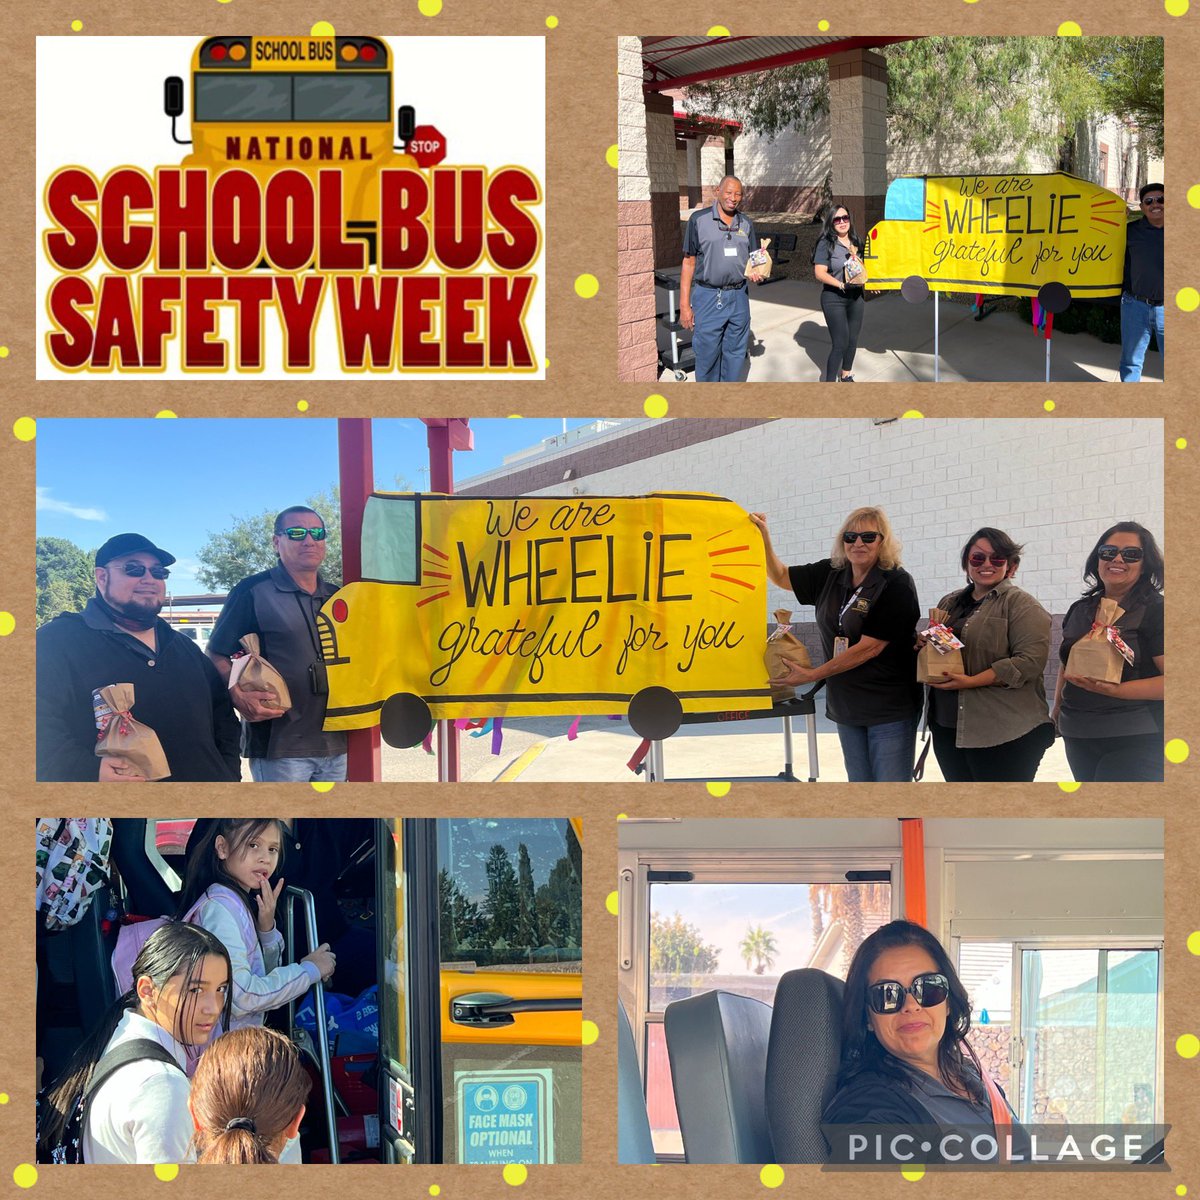 Thank you for the pride and love you show as you transport our scholars to and from Dalmatian Nation. #StriveForExcellence #NationalSchoolBusSafetyWeek